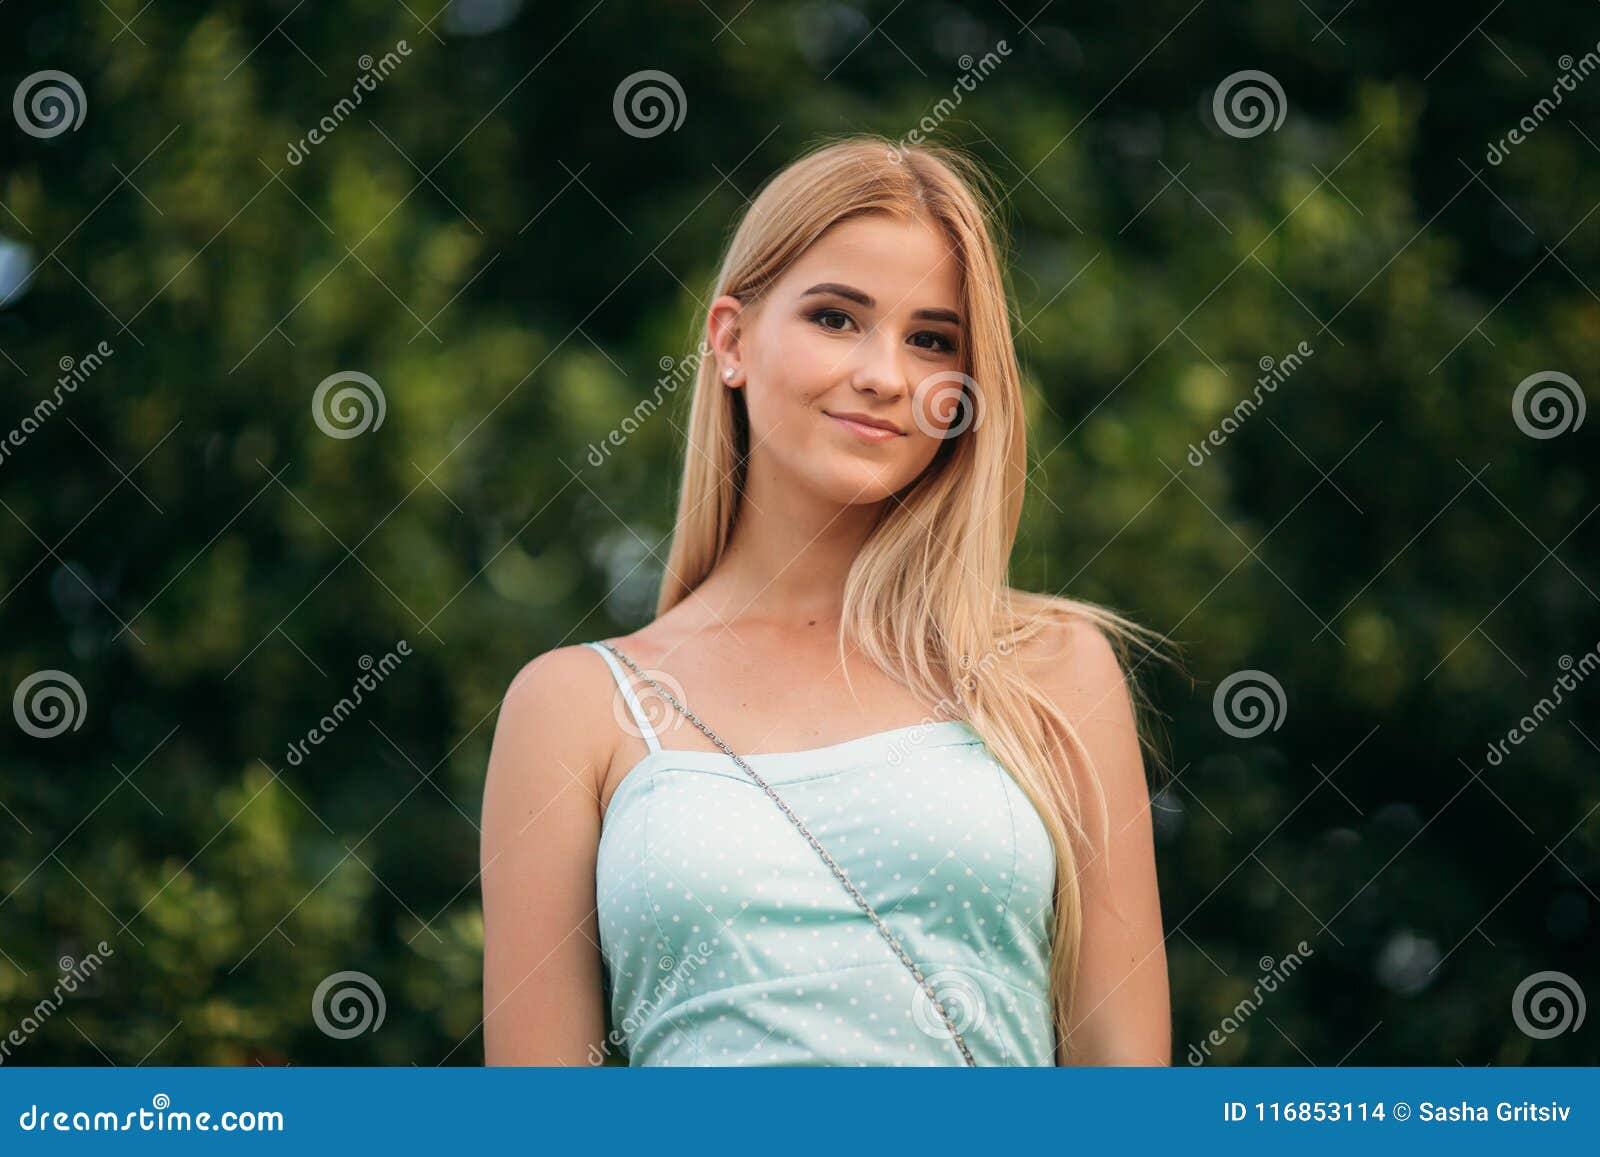 Turquoise Dress with Blonde Hair - wide 11